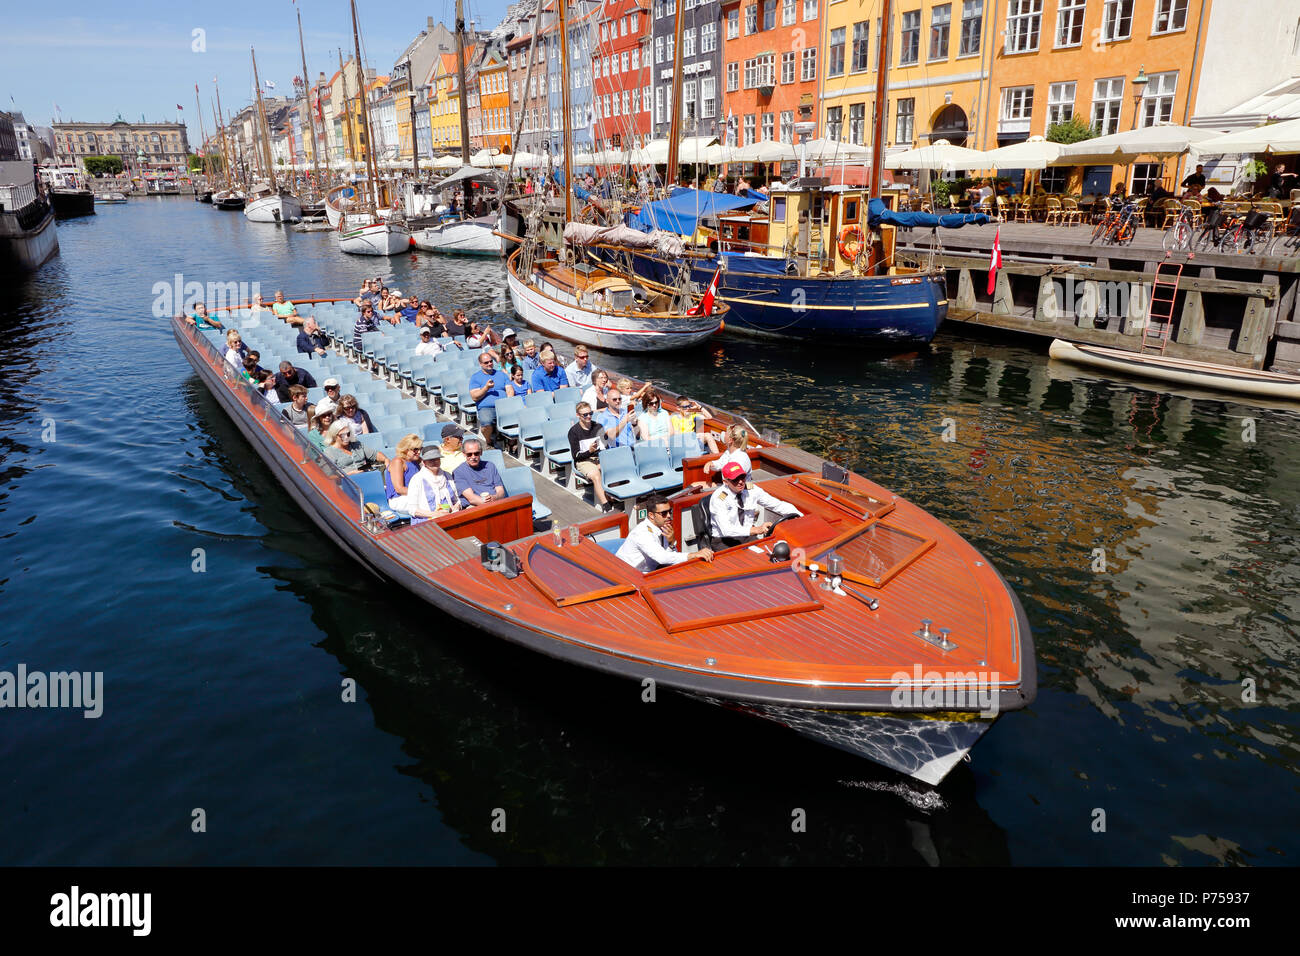 Copenhagen, Denmark - June 27, 2018: A n open top sigthseeing boat with tourists in Nyhavn old port on a guided canal tour. Stock Photo